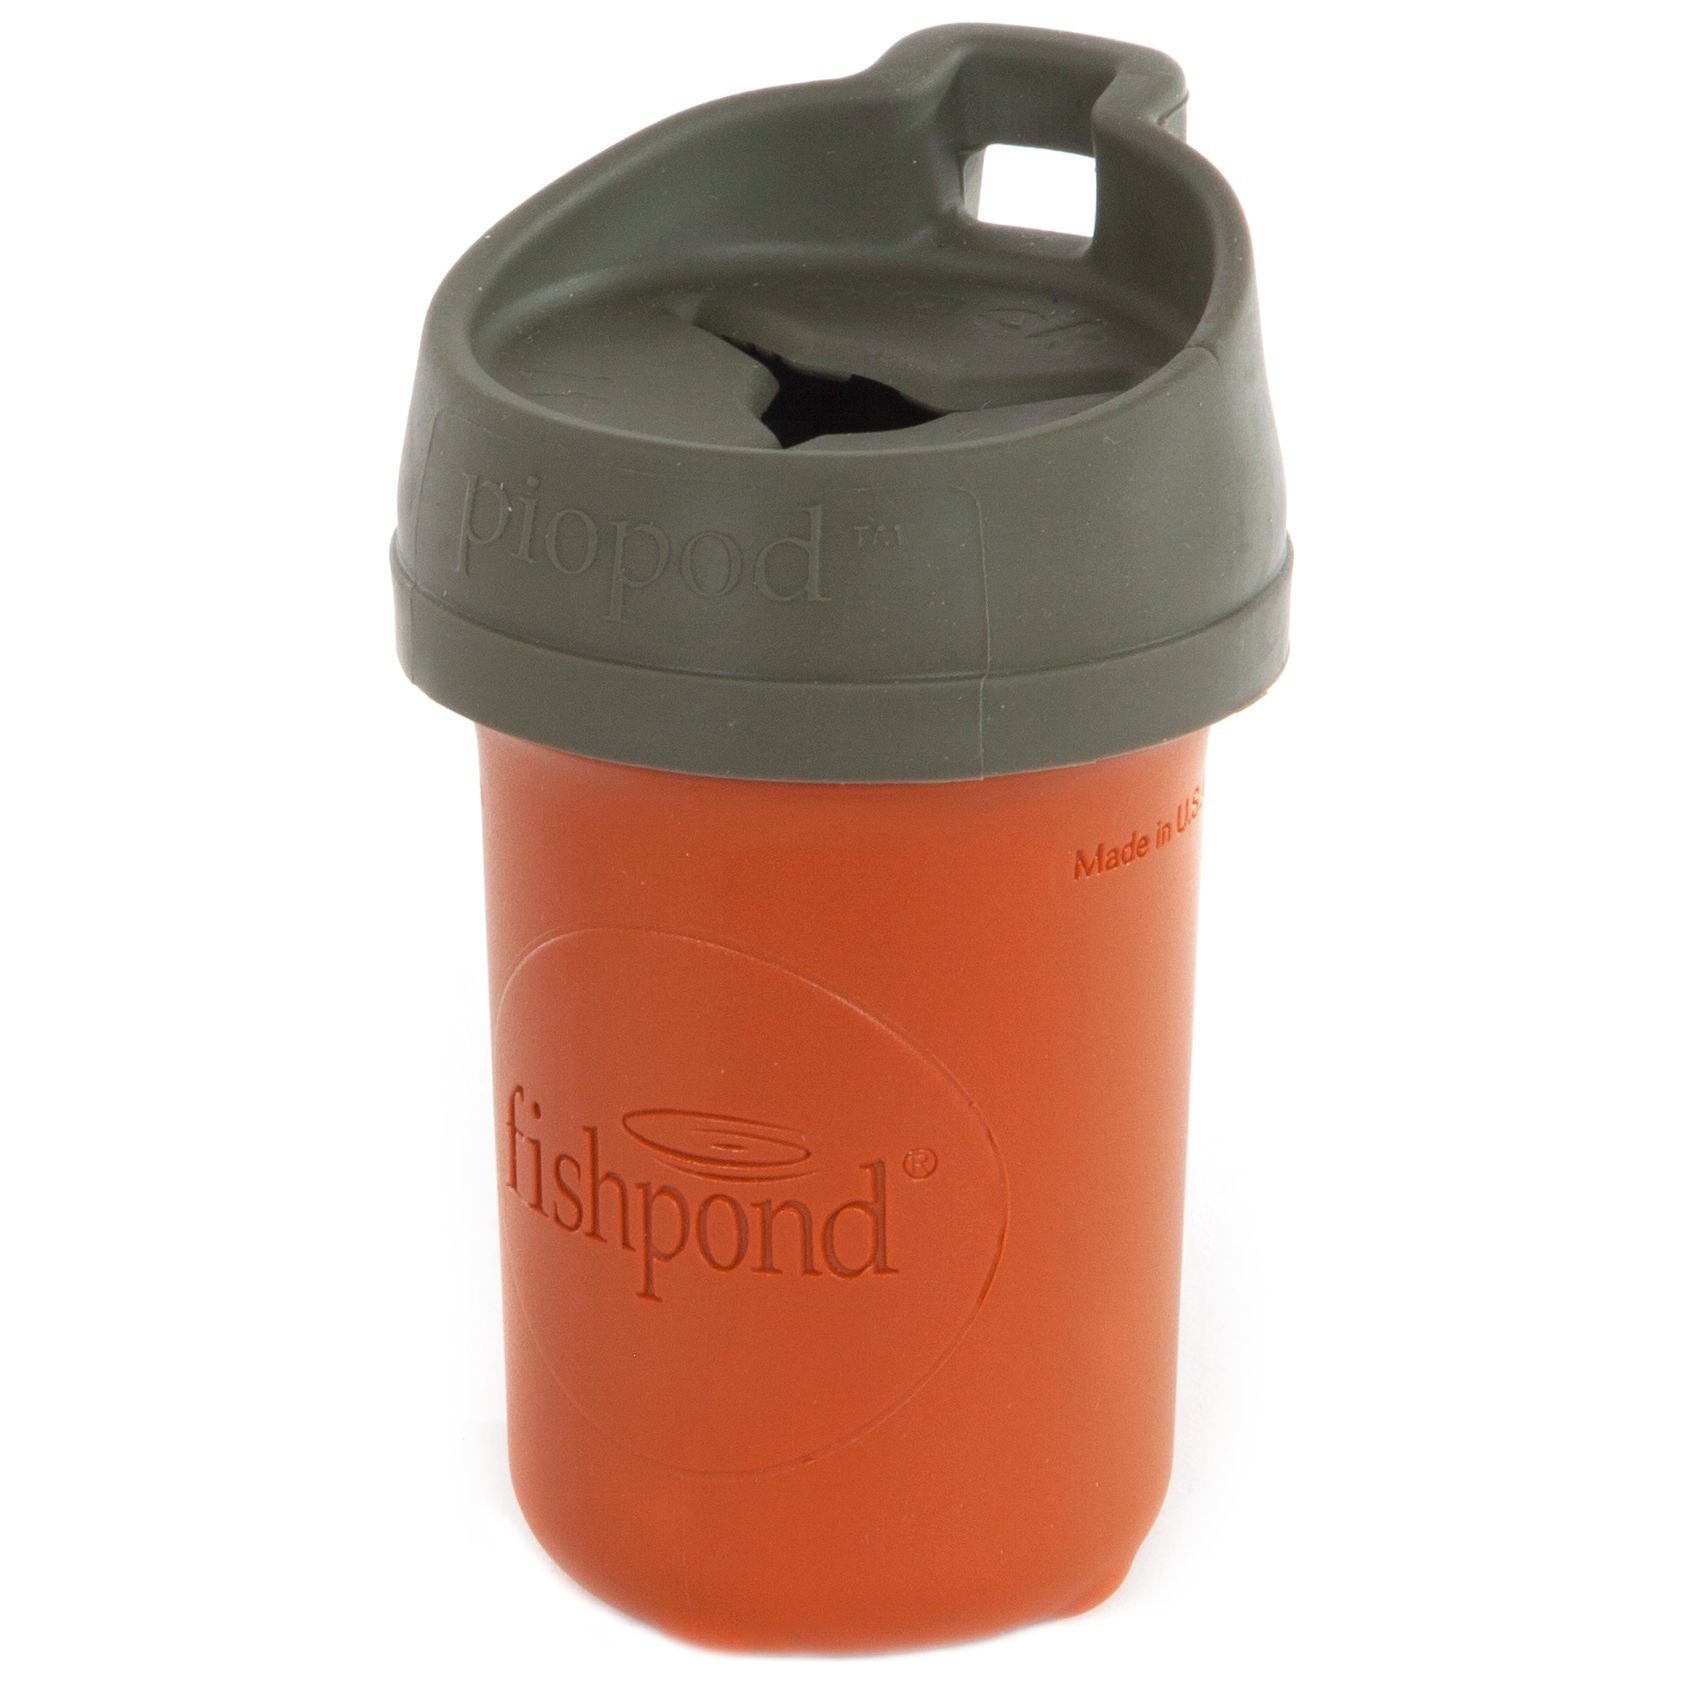 Fishpond Largemouth PIOPOD Microtrash Container Cutthroat Orange Image 01